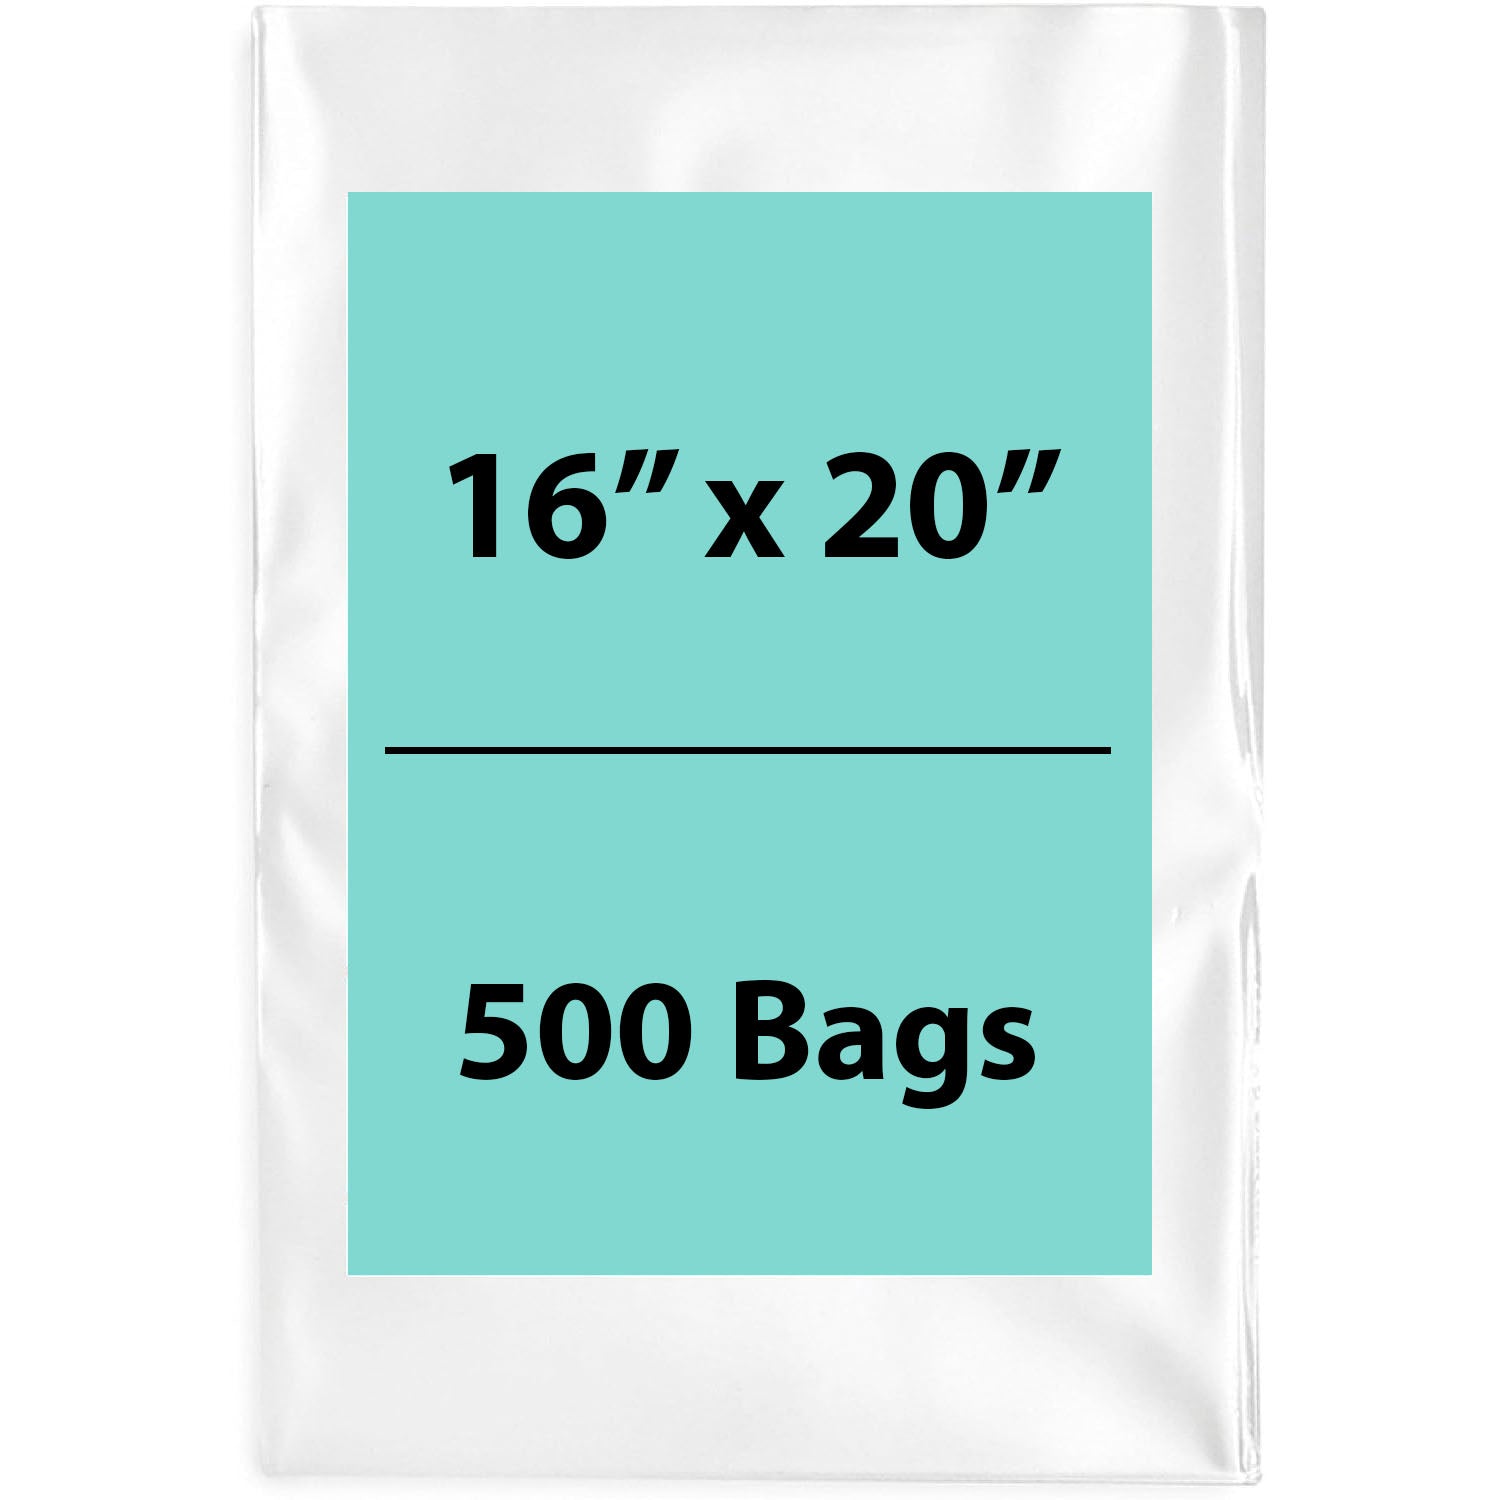 Clear Poly Bags 2Mil 16X20 Flat Open Top (LDPE)